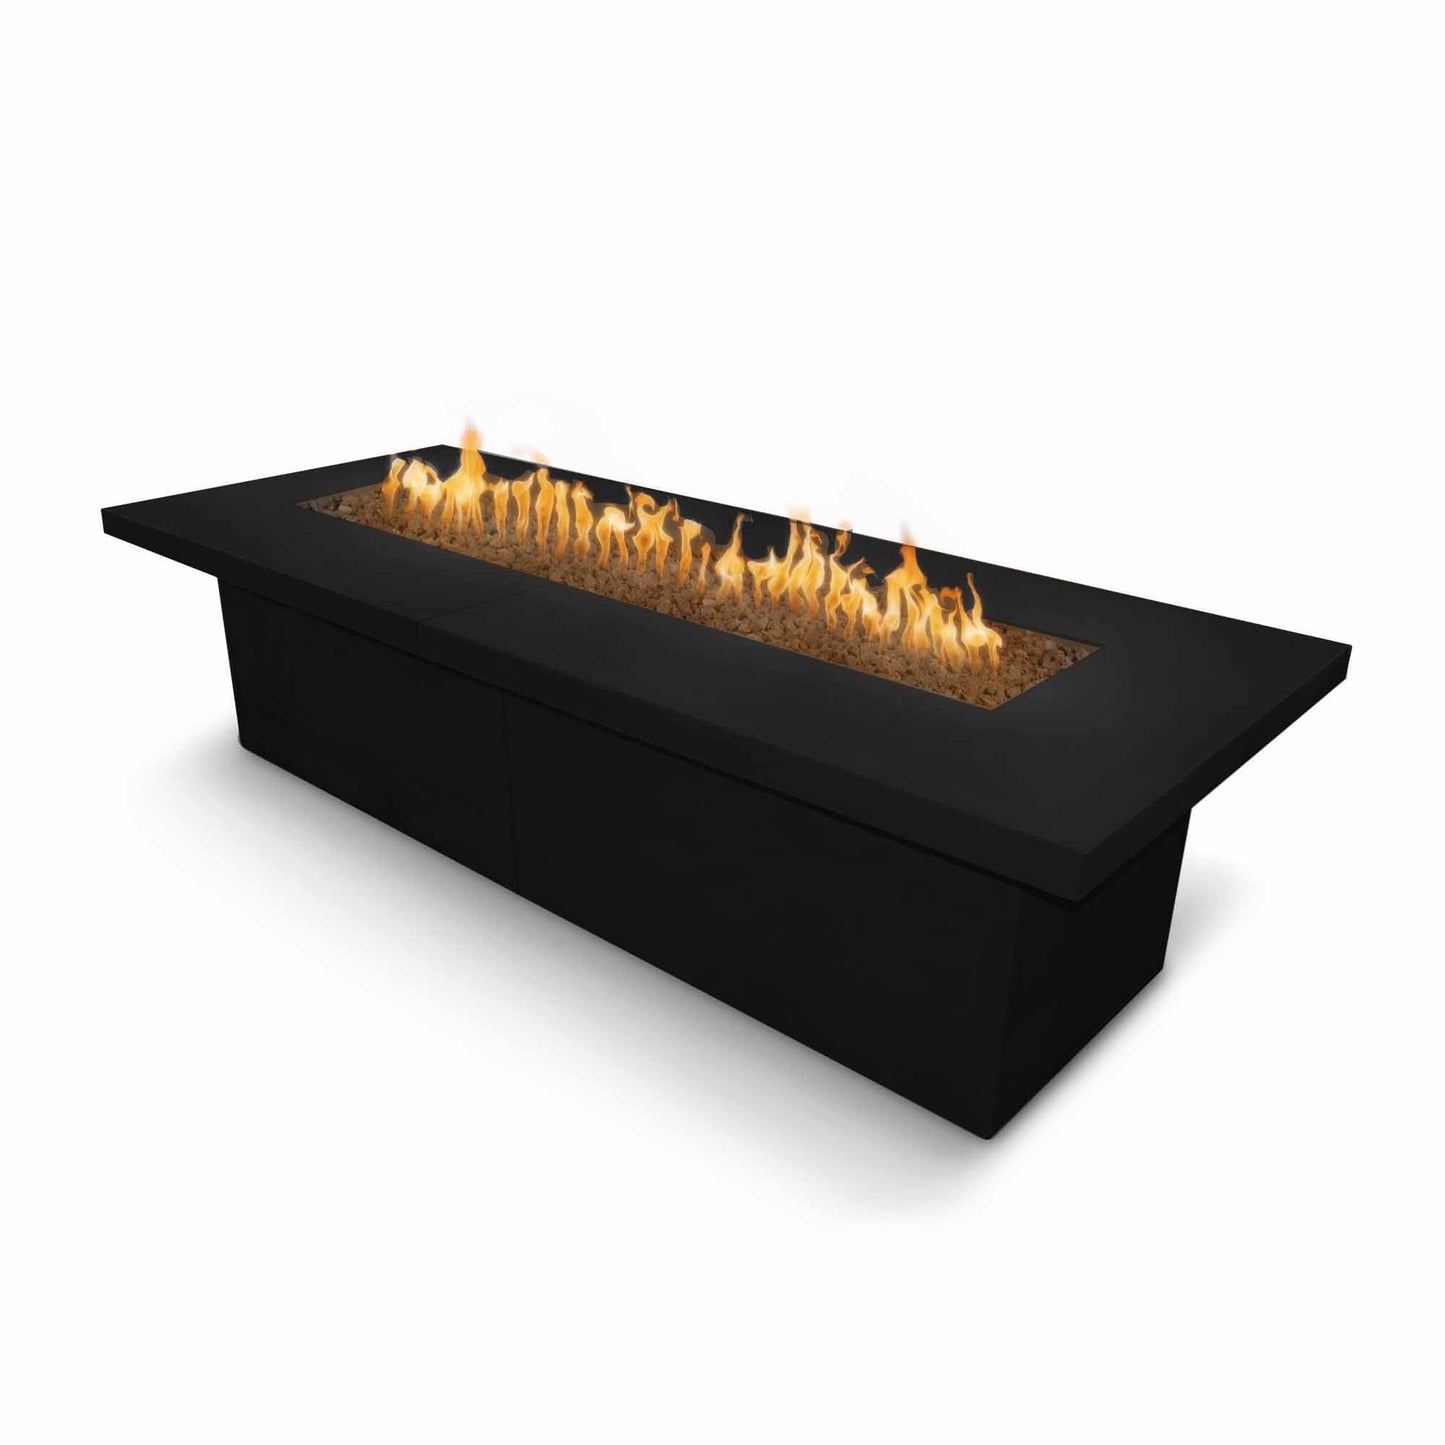 The Outdoor Plus Rectangular Newport 72" Corten Steel Liquid Propane Fire Pit with 110V Electronic Ignition